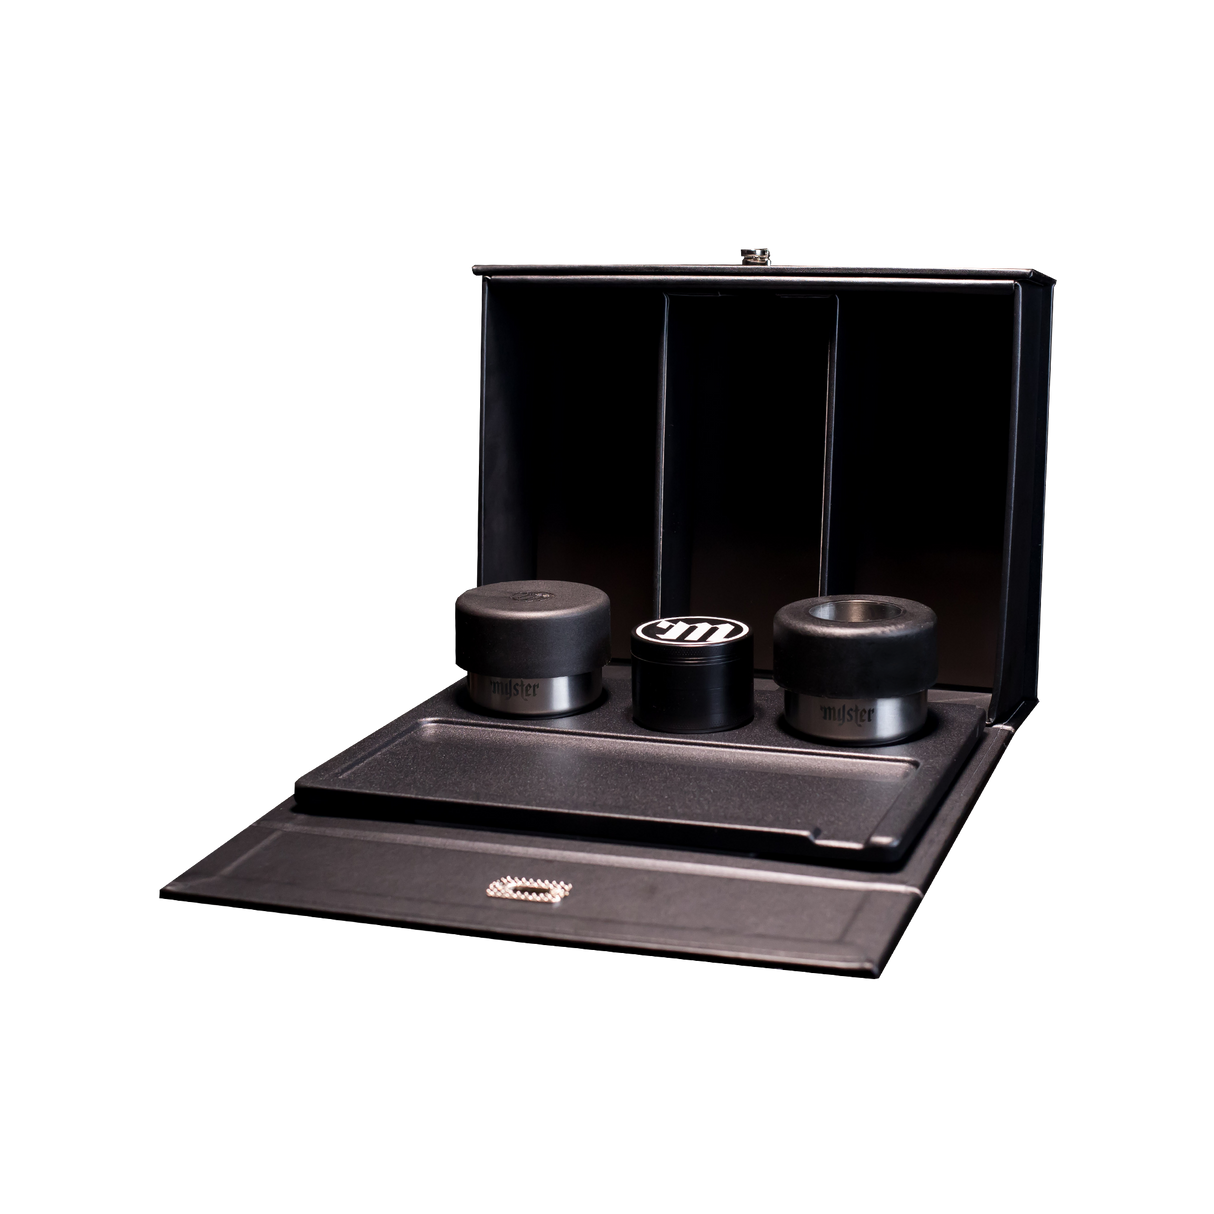 Myster Limited Edition Blacked Out Stashtray Set, Front View on Seamless Black Background